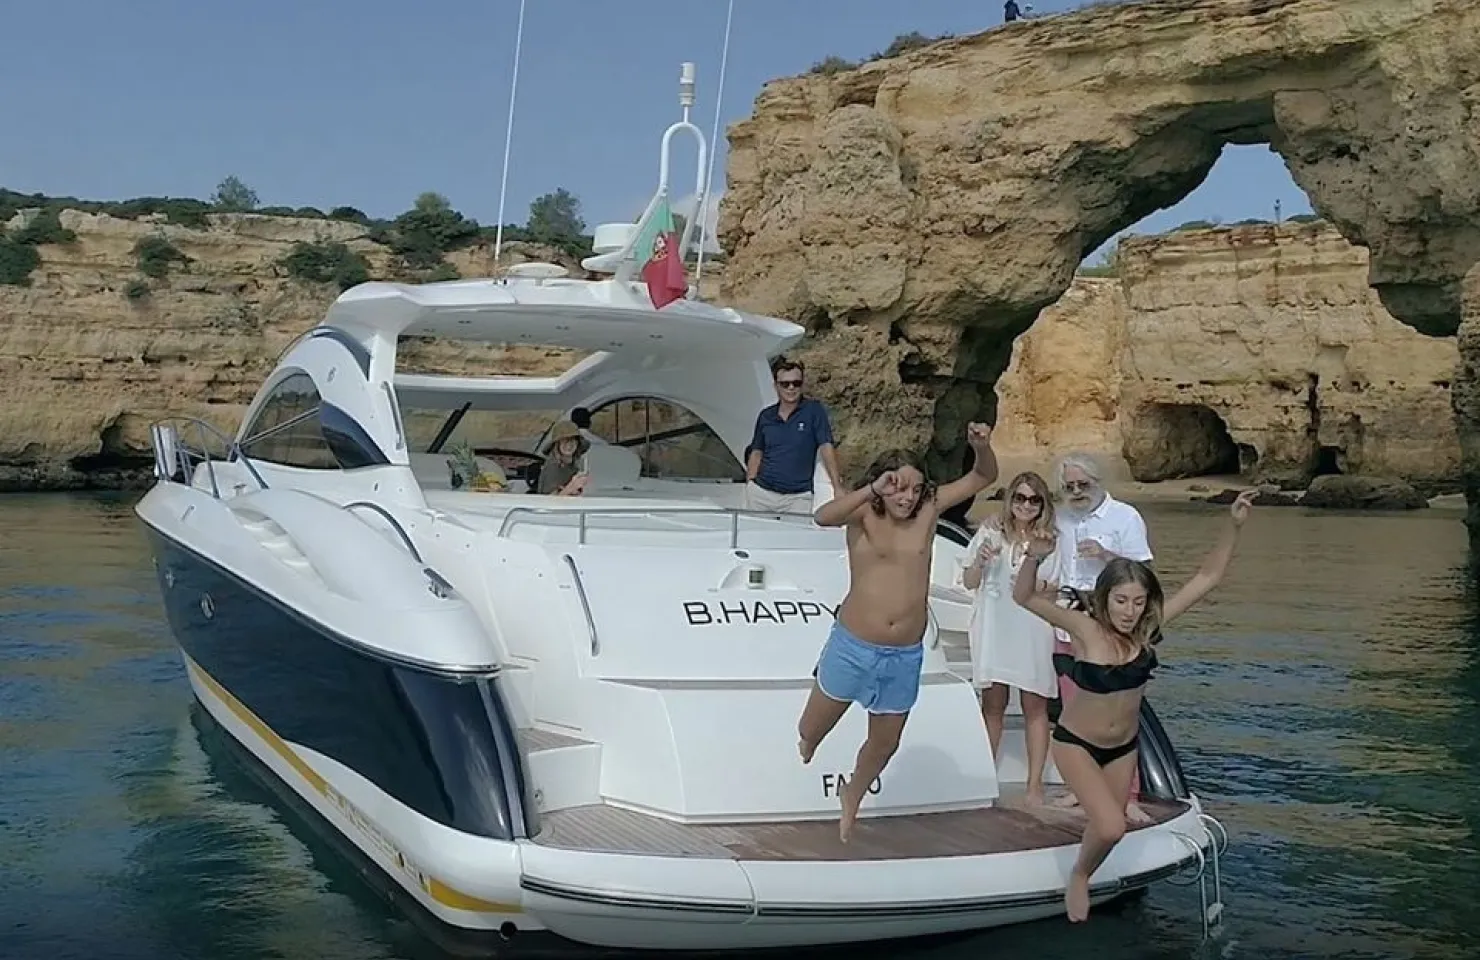 B.Happy Sunseeker 50 day charter yacht - Rent a boat in Vilamoura